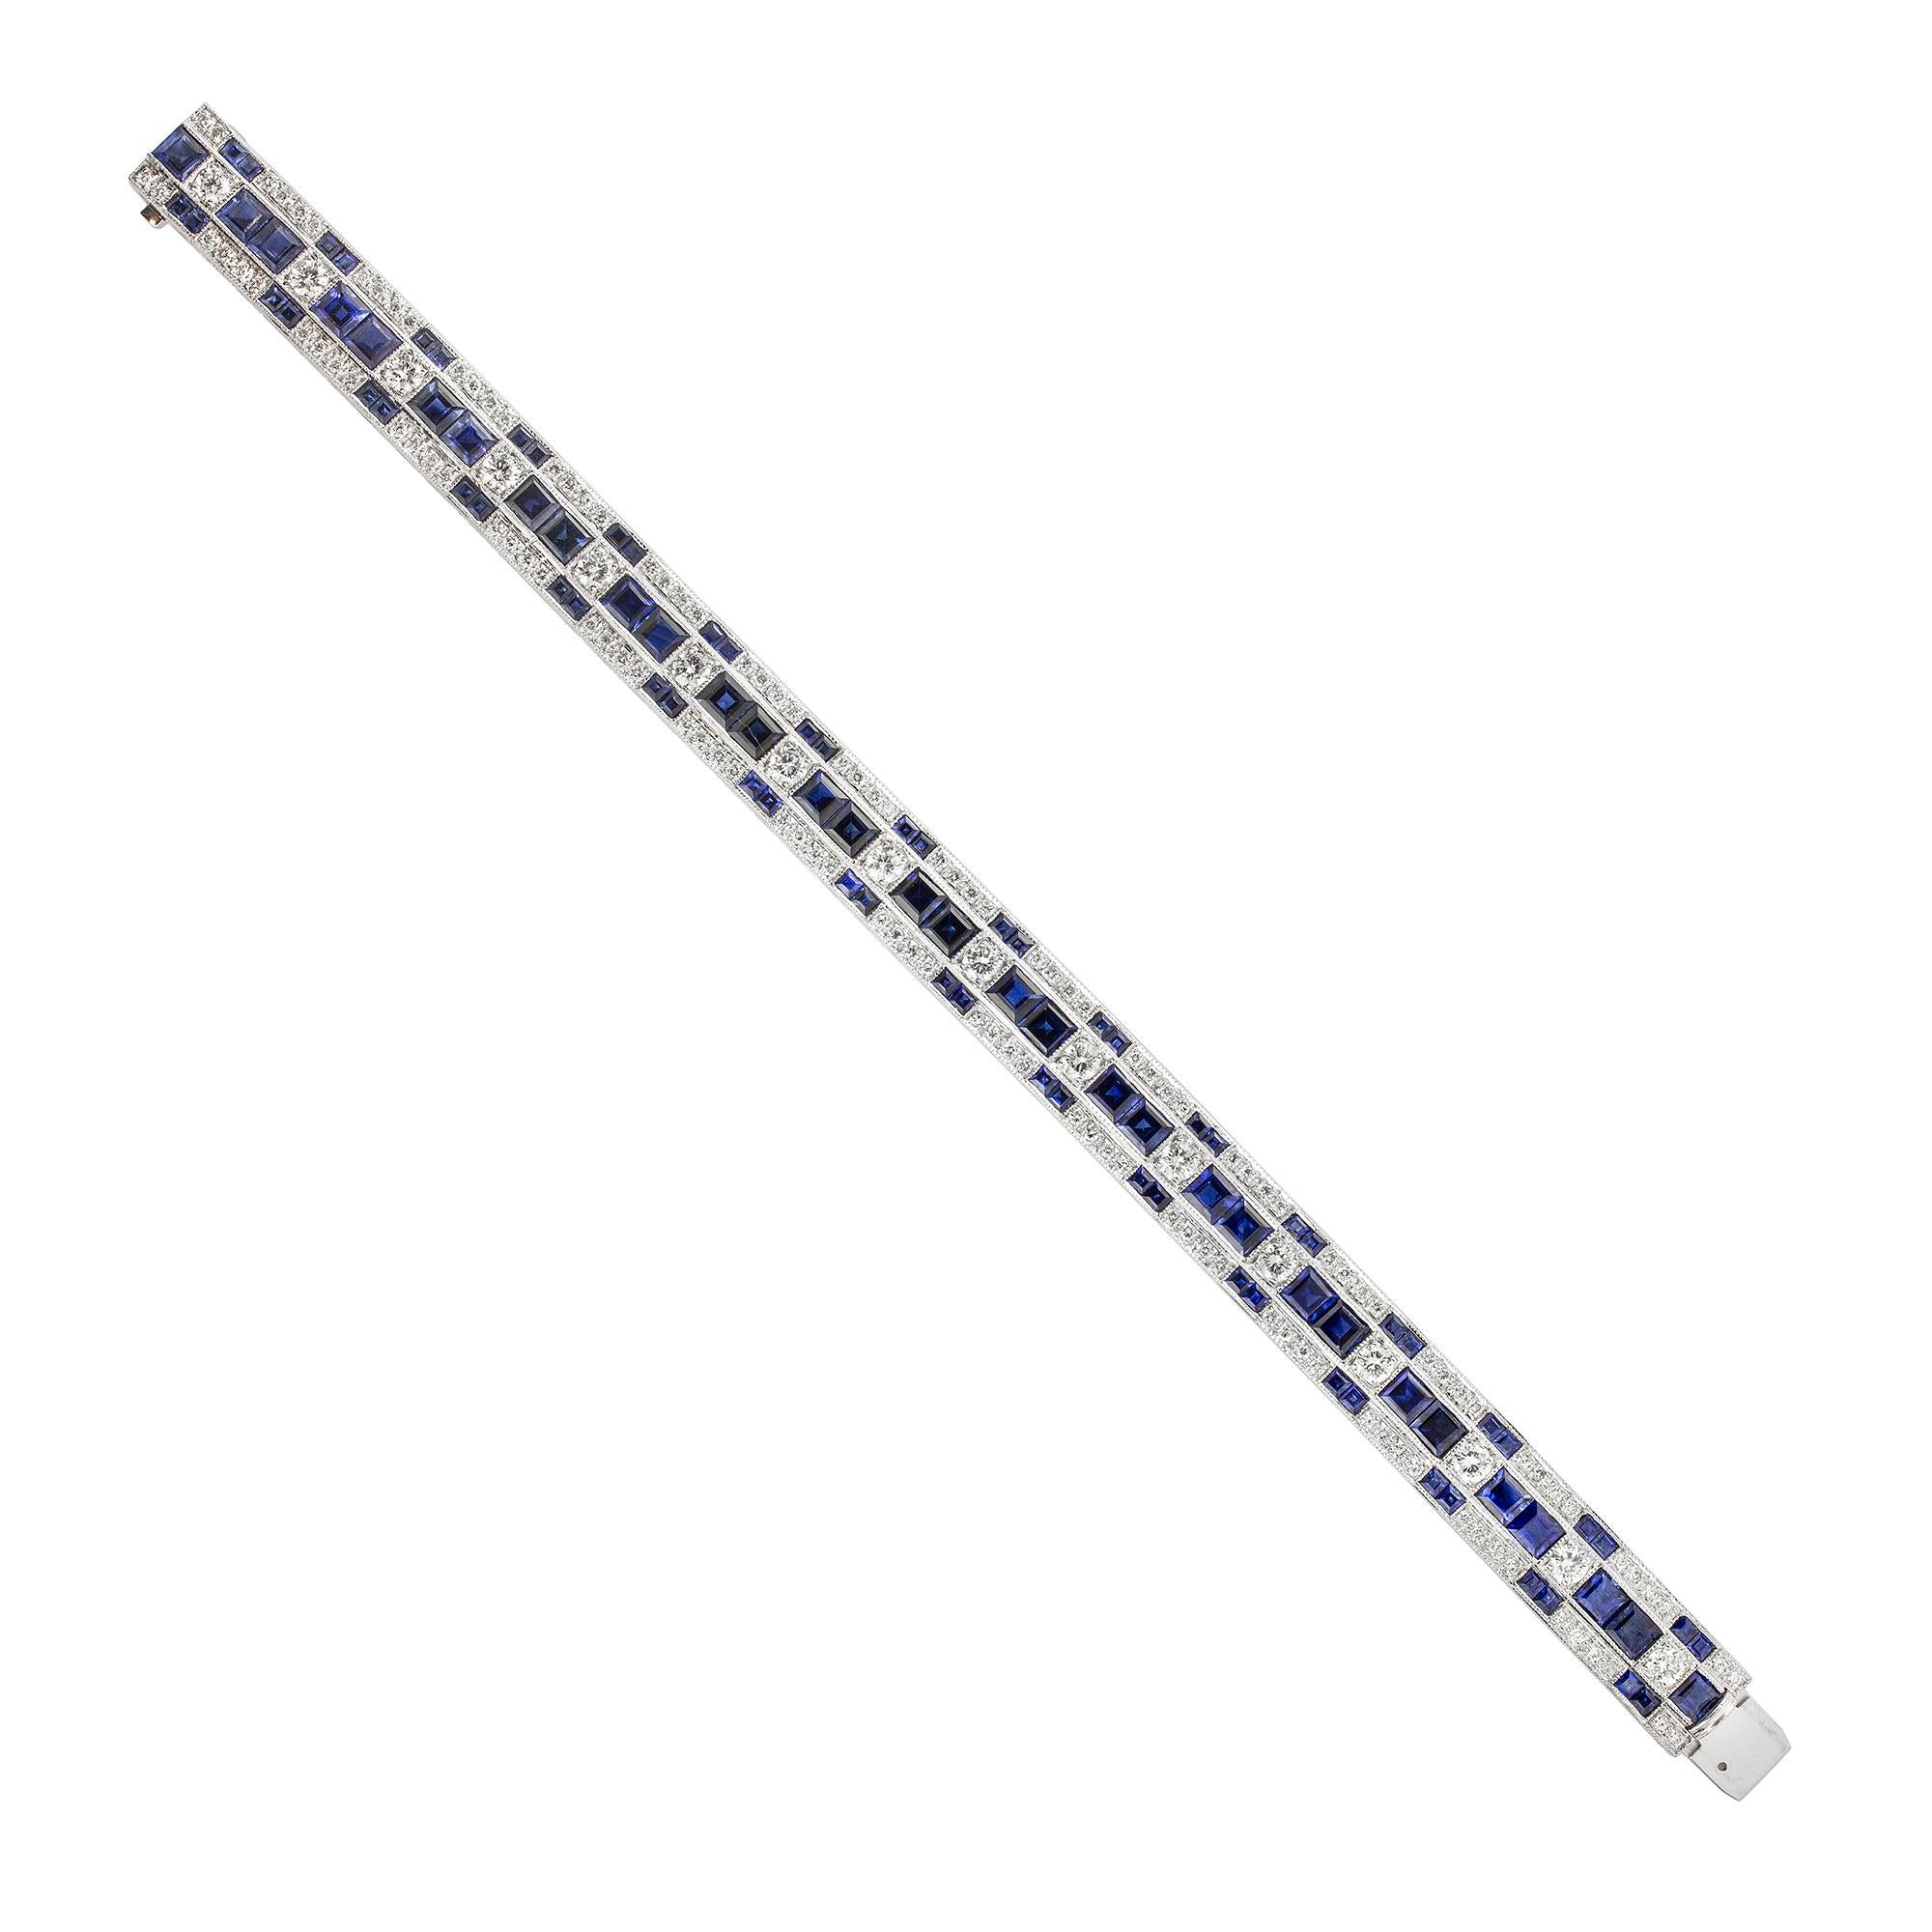 A sapphire and diamond line bracelet alternatively-set with square step-cut sapphires and round brilliant-cut diamonds, estimated total sapphire weight 7.5 carats, estimated diamond weight 4.9 carats, all millegrain set in  white gold, stamped 18k,